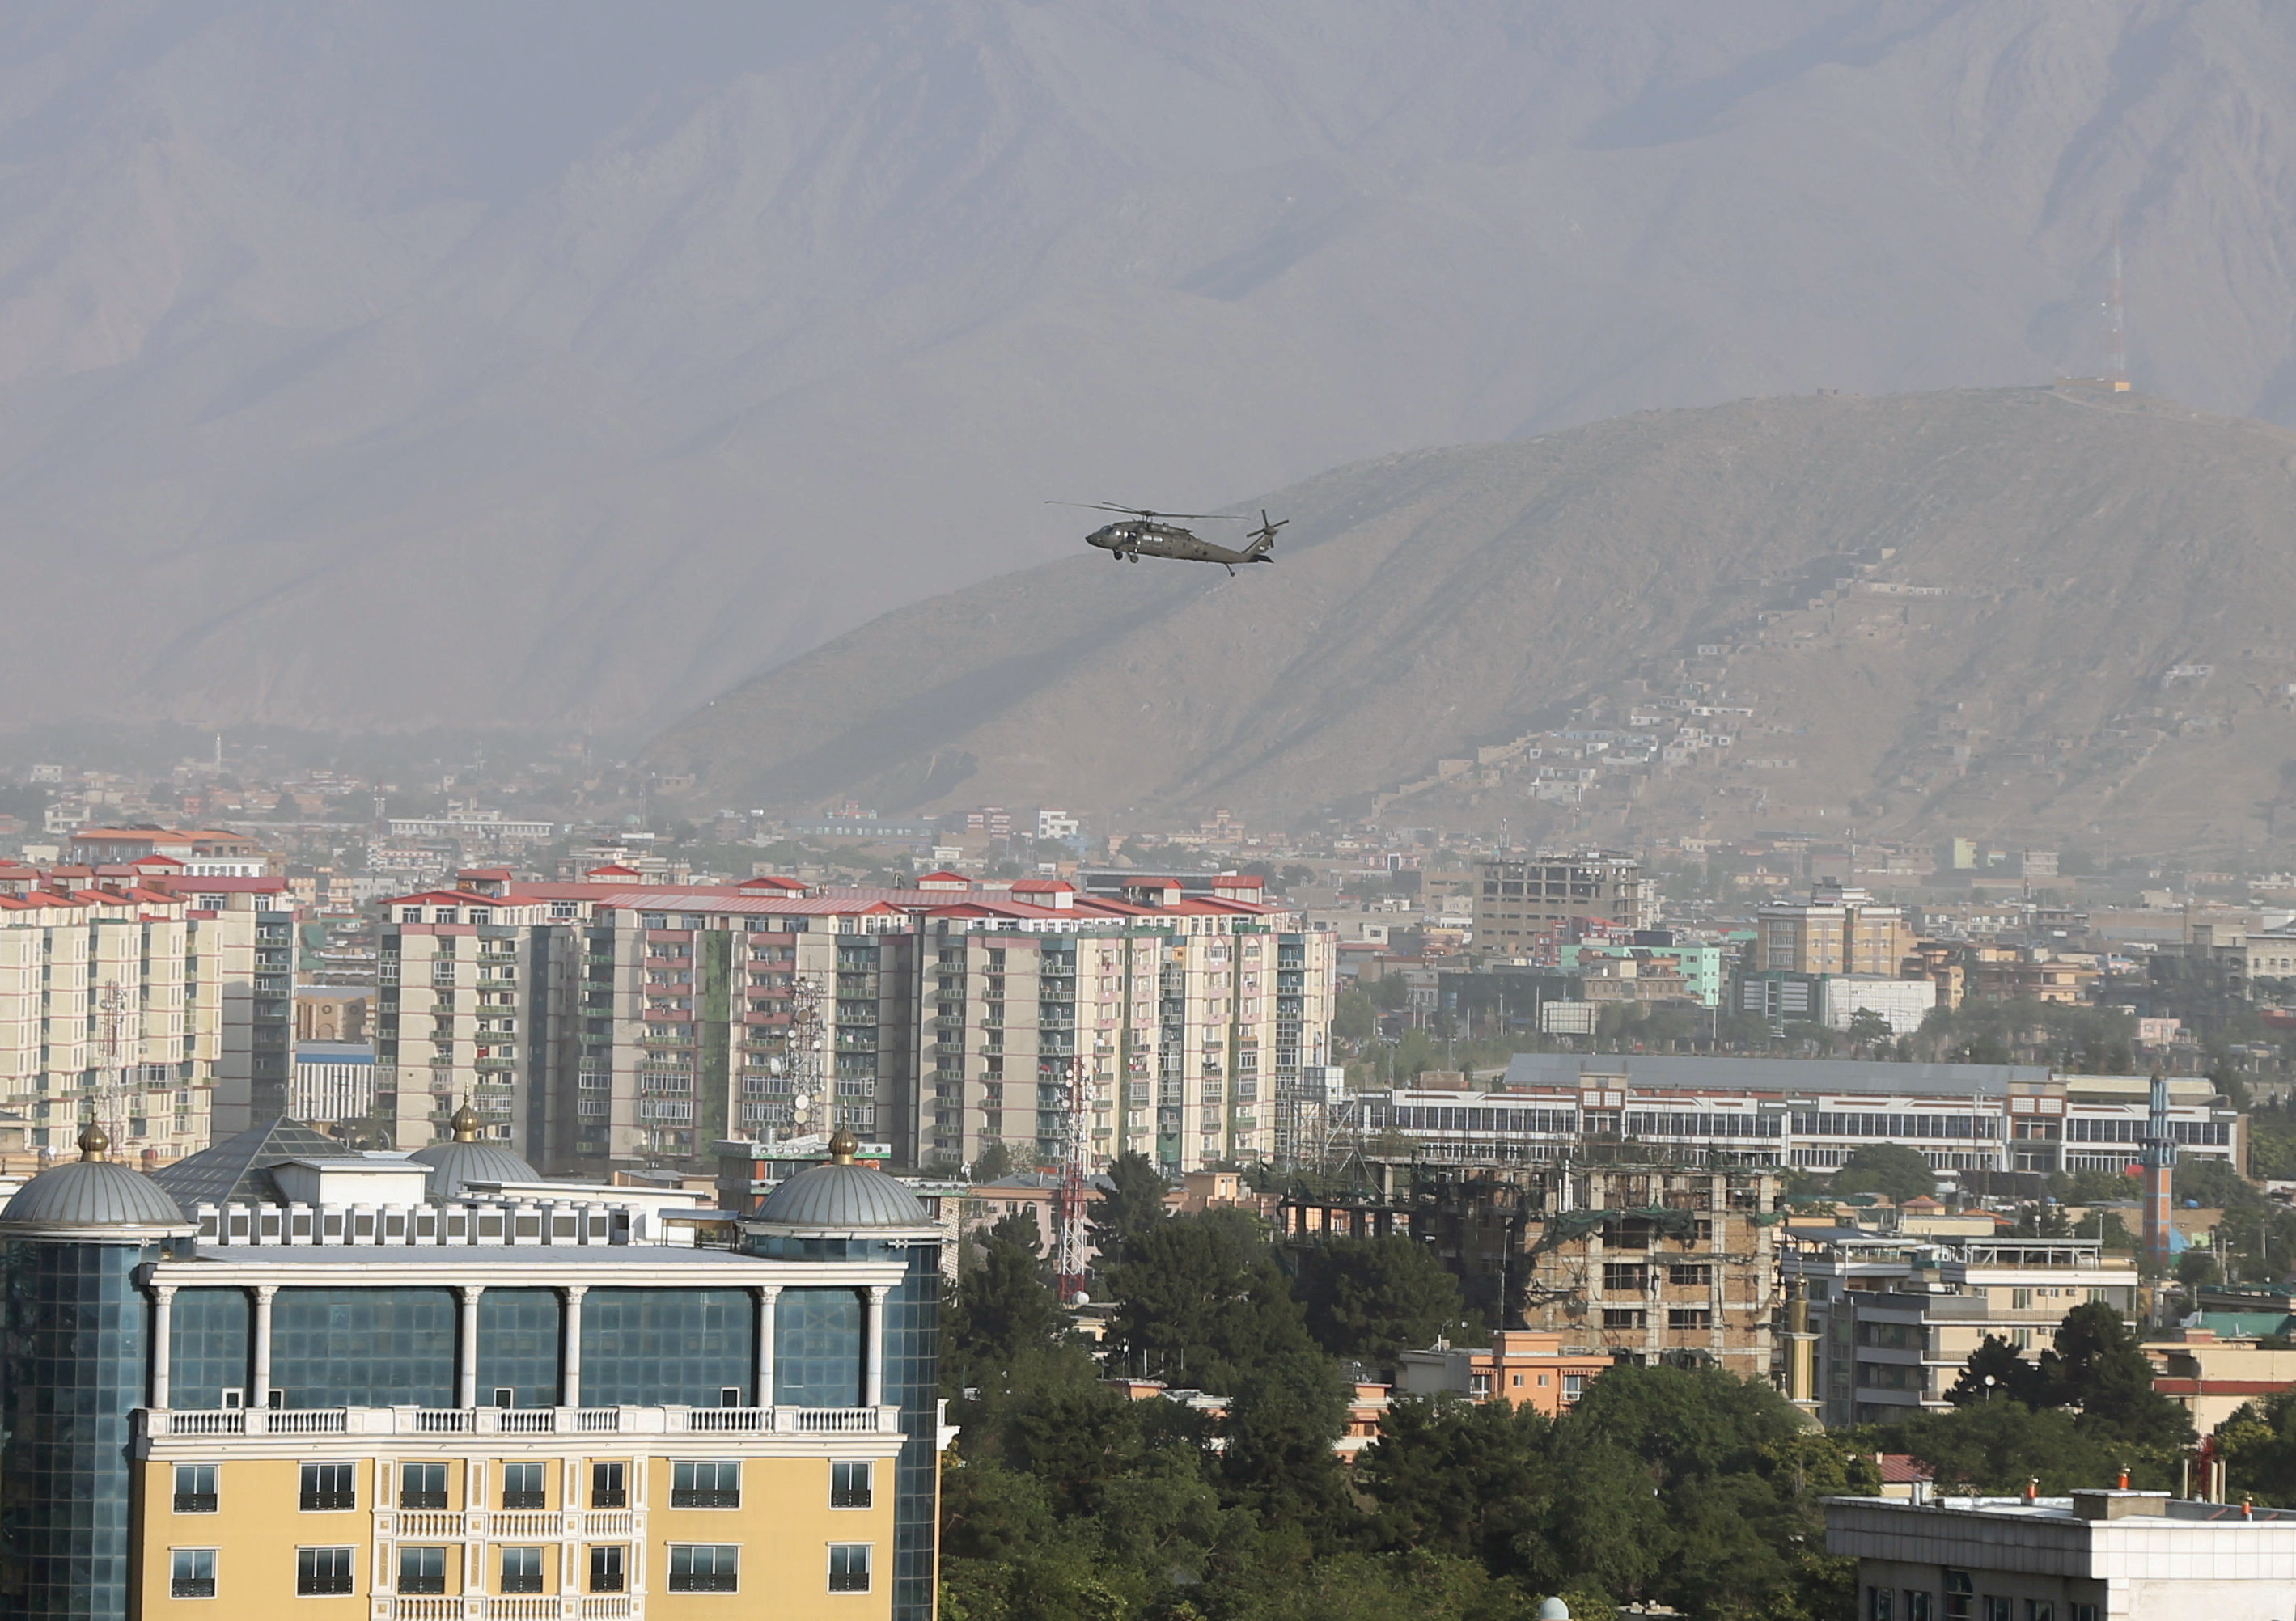 A NATO helicopter flies over the city of Kabul, Afghanistan